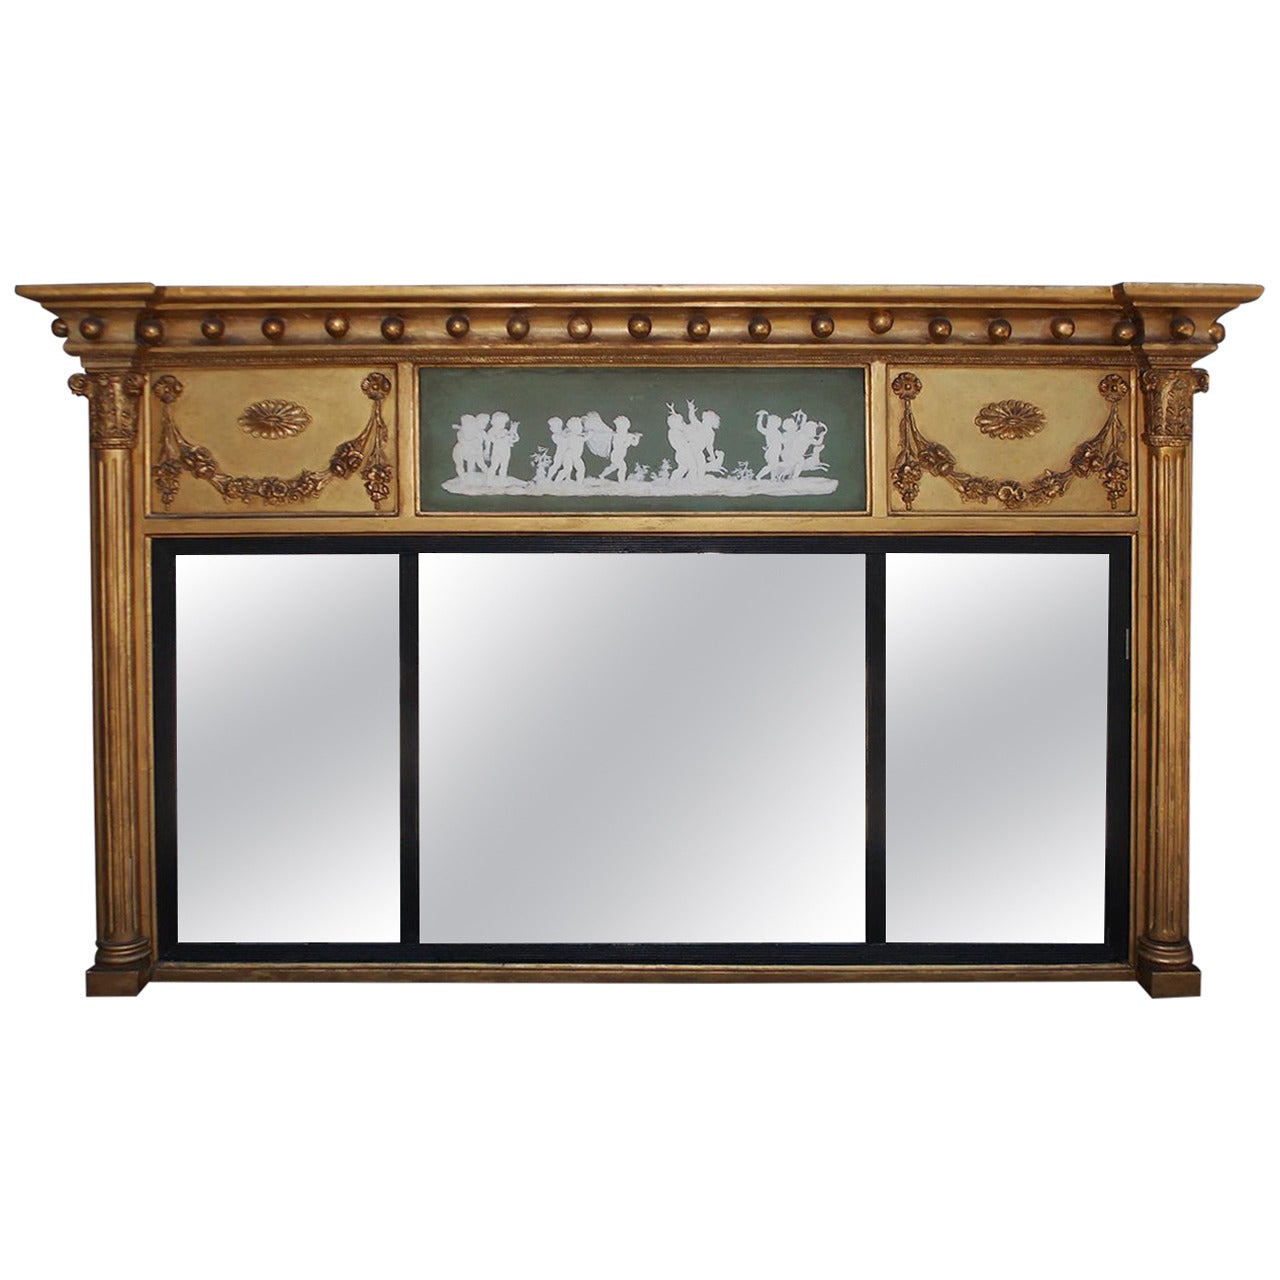 English Gilt Carved Wood and Jasper Ware Over Mantel Mirror, Circa 1810 For Sale